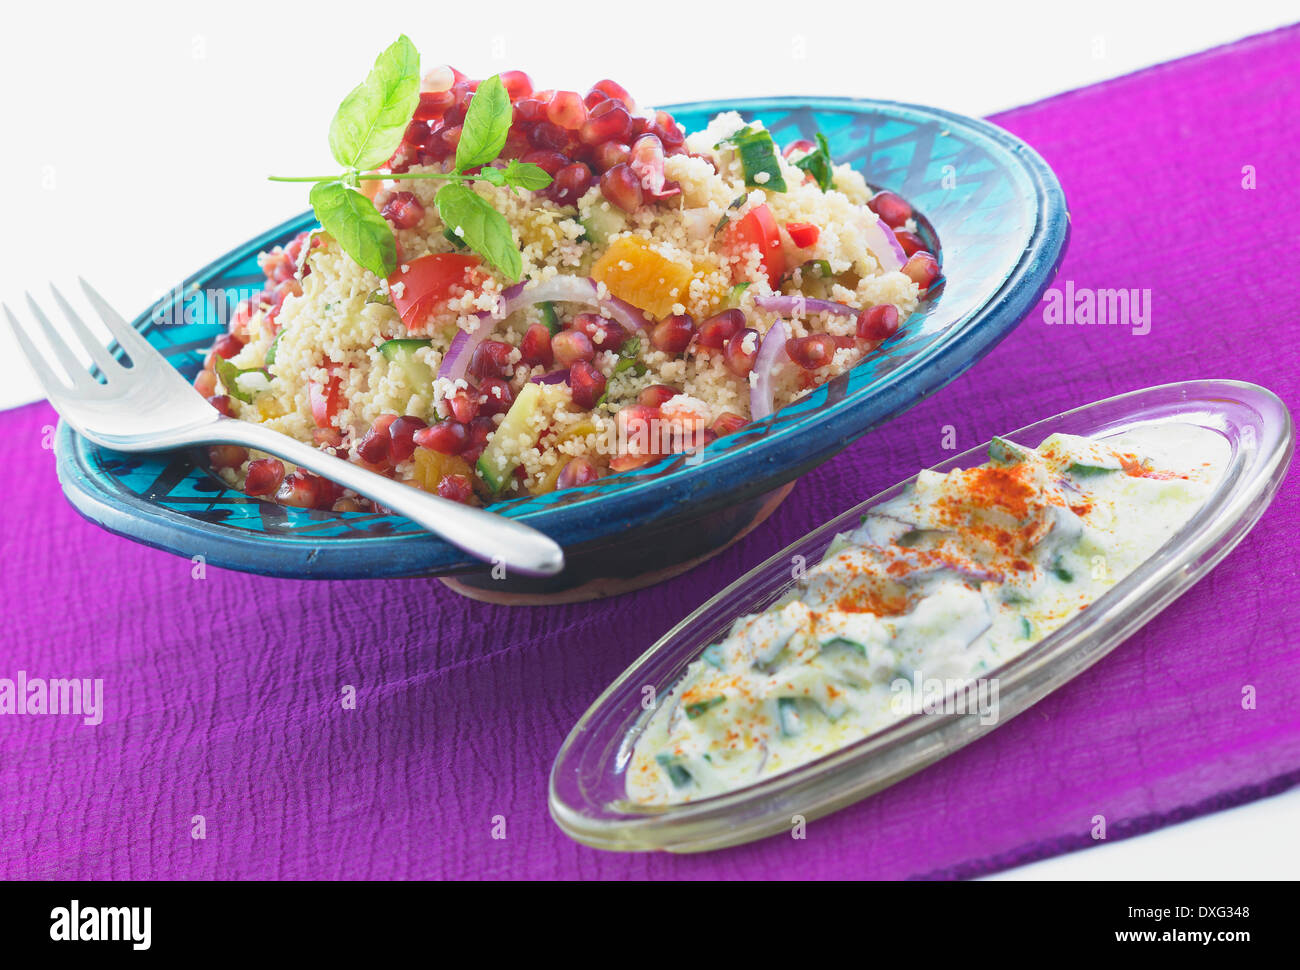 Pomegranate With Couscous Stock Photo